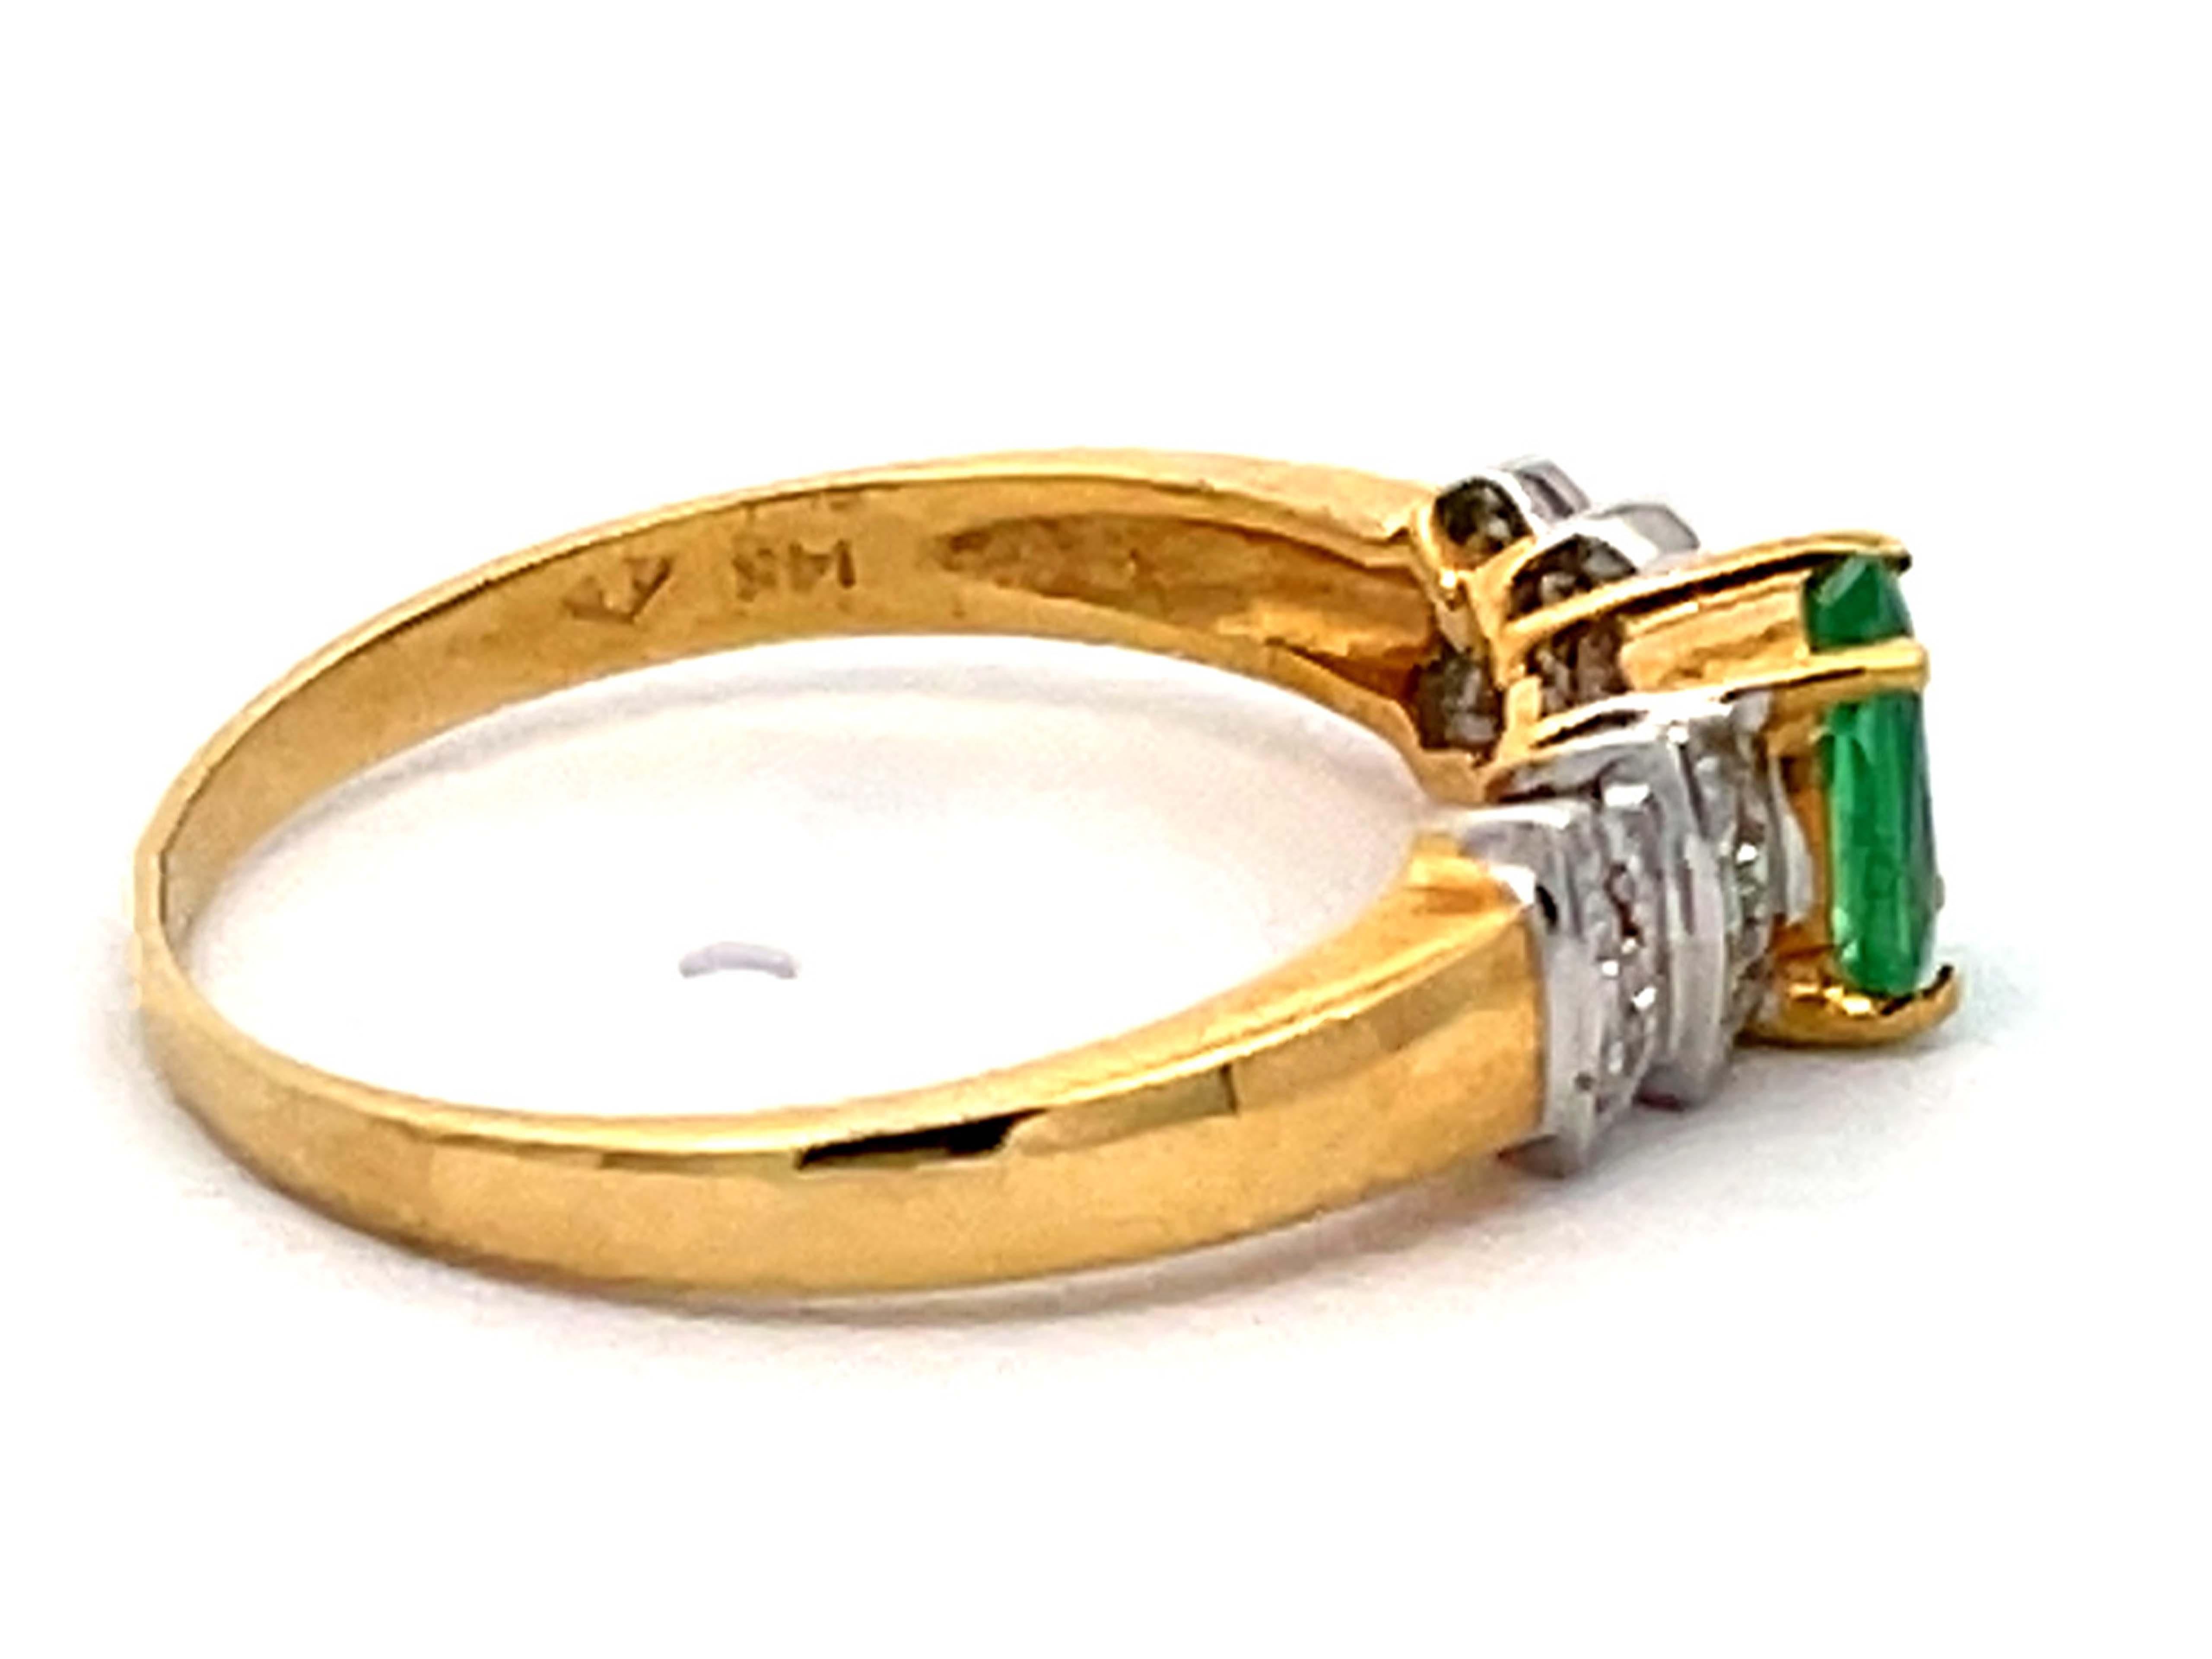 Vintage Green Oval Emerald and Diamond Ring in 14k Yellow Gold In Excellent Condition For Sale In Honolulu, HI